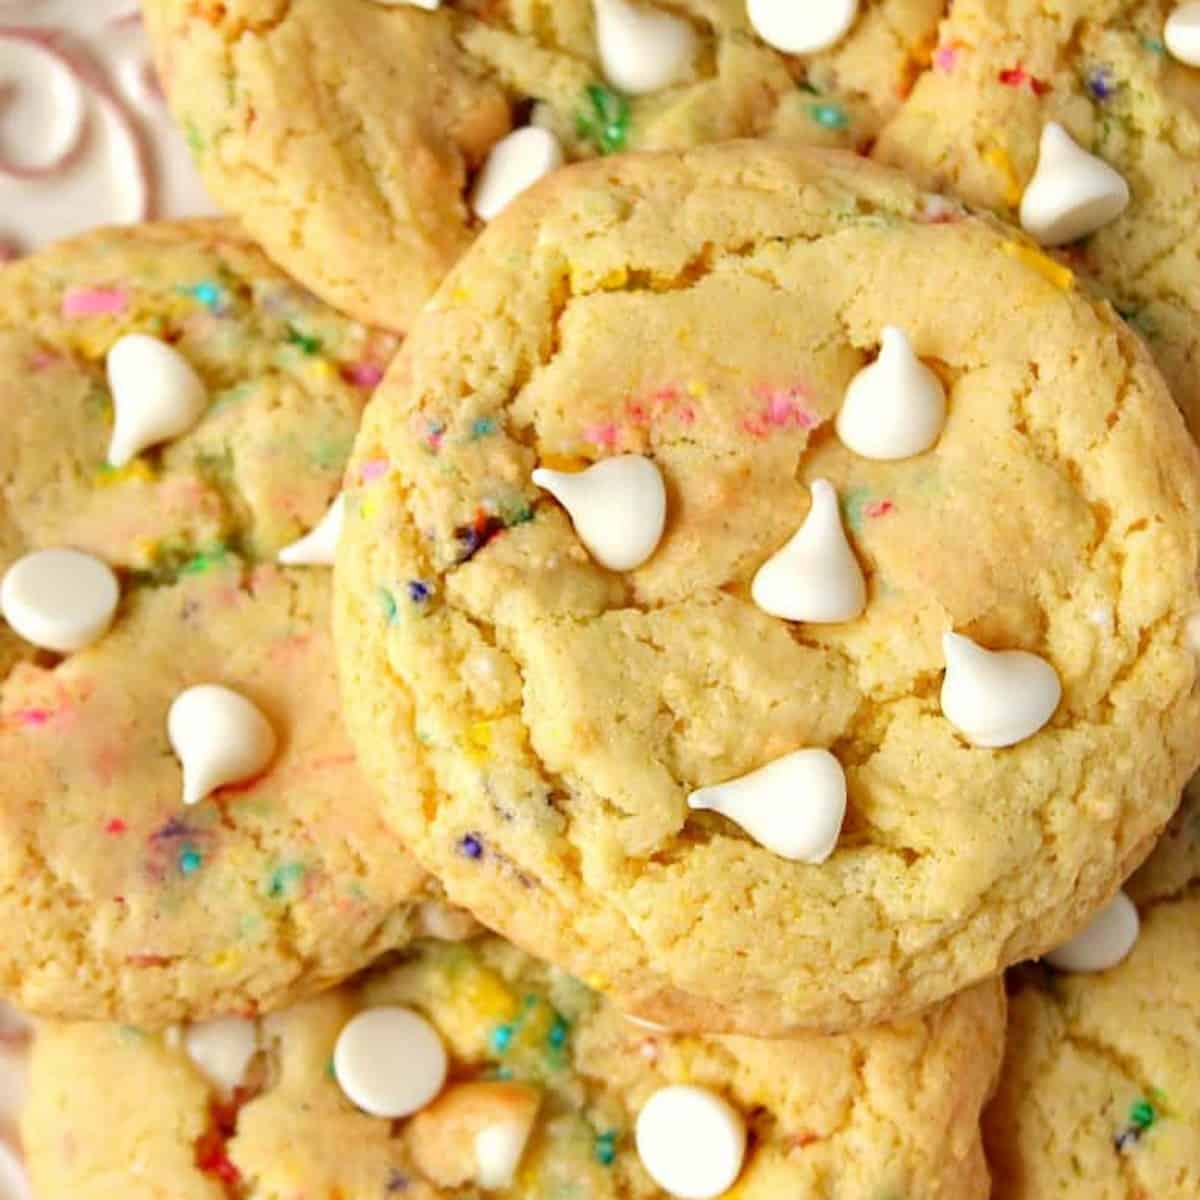 Cookies with white chocolate chips on a plate.